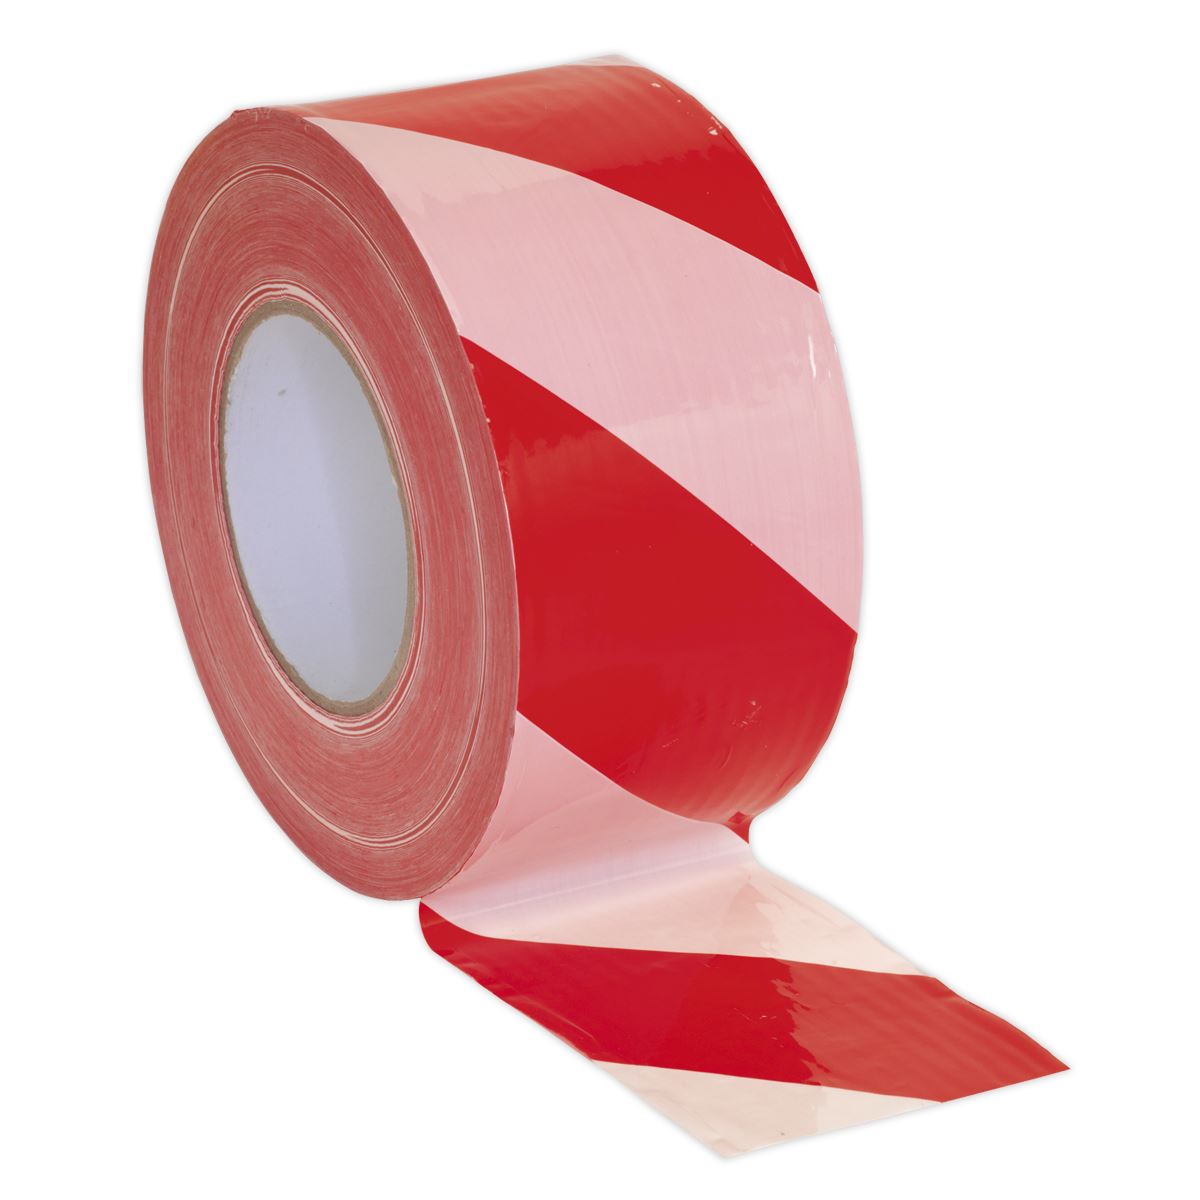 Sealey 80mm x 100m Non Adhesive Hazard Barrier Tape Red & White